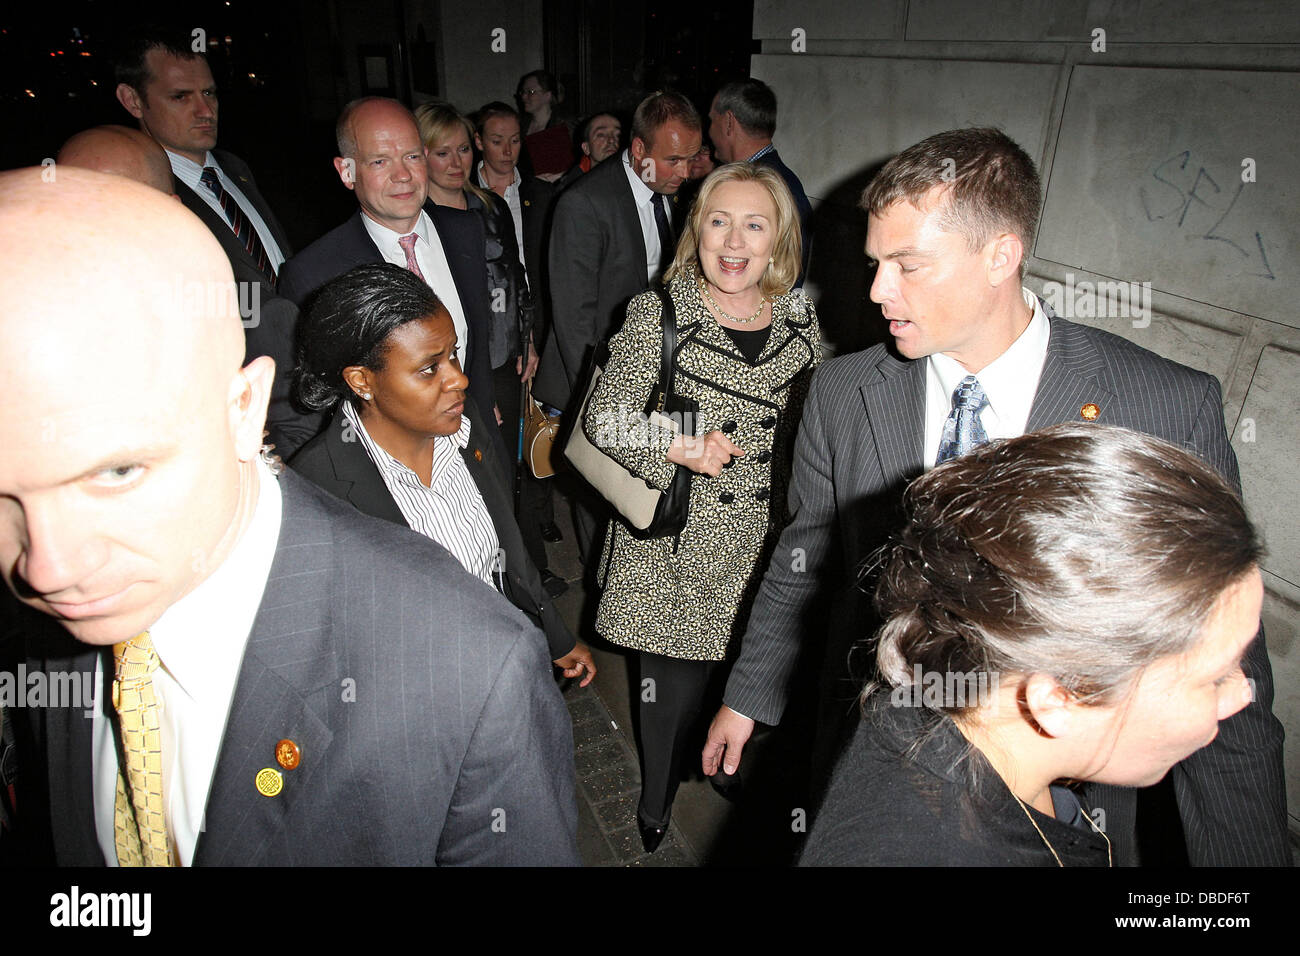 US Secretary of State Hillary Clinton leaves the Wolseley restaurant after dining with Foreign Secretary William Hague and his wife Ffion Hague London, England - 24.05.11 Stock Photo